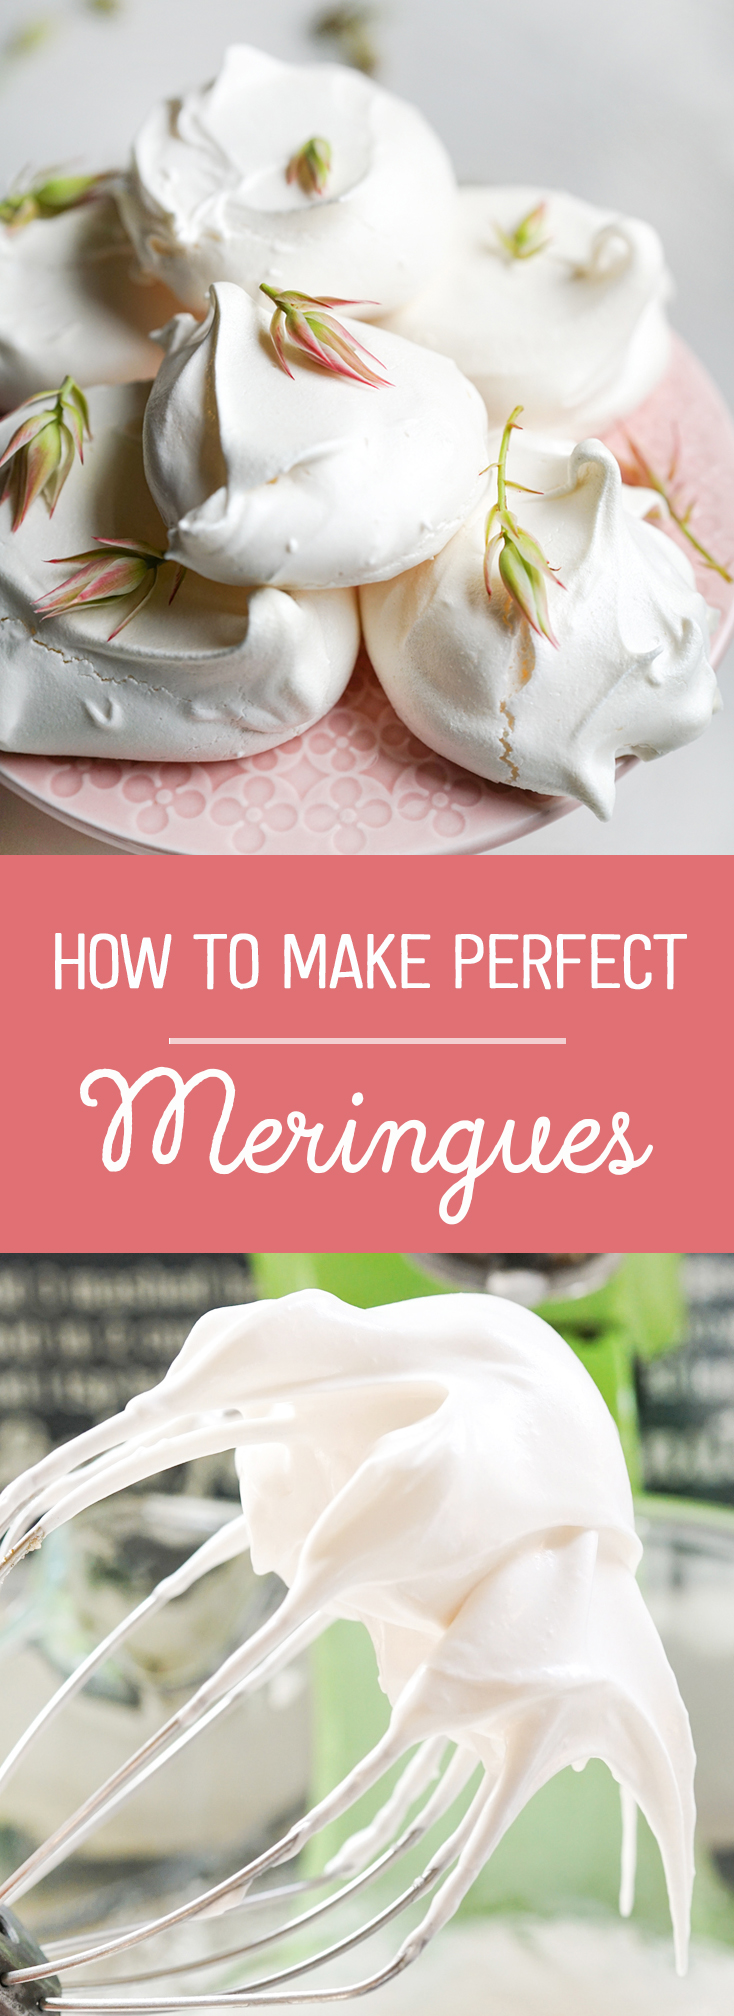 learn how to make perfect meringues